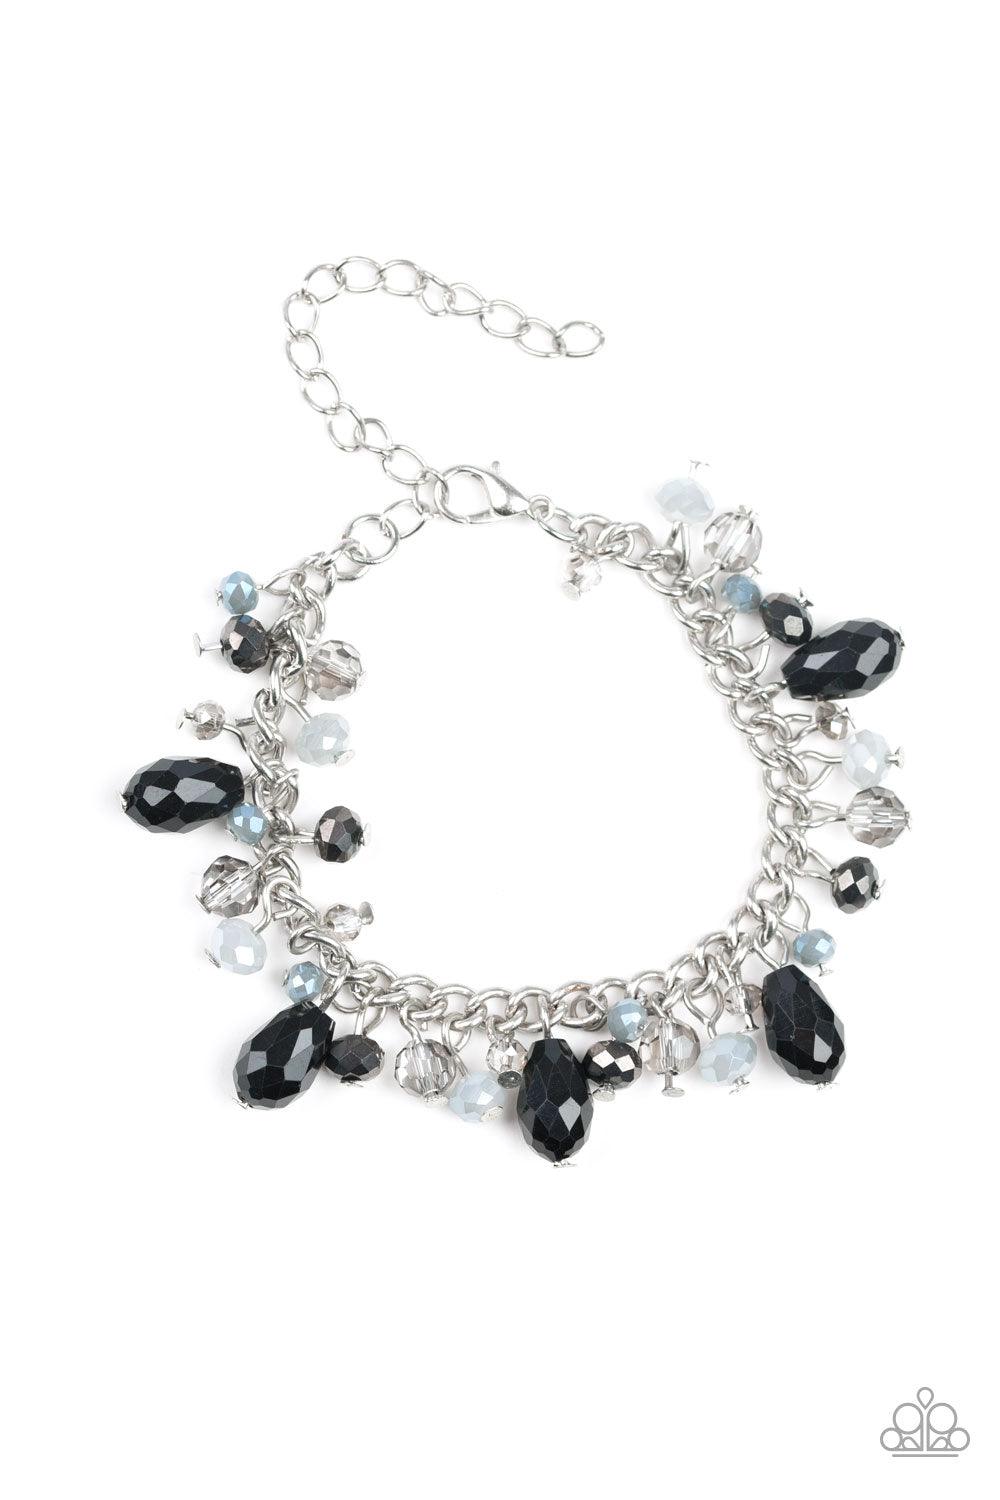 Paparazzi Accessories Catwalk Crawl ~Multi Featuring crystal-like and metallic opaque finishes, mismatched beading swings from a shimmery silver chain, creating a glamorous fringe around the wrist. Features an adjustable clasp closure. Sold as one individ